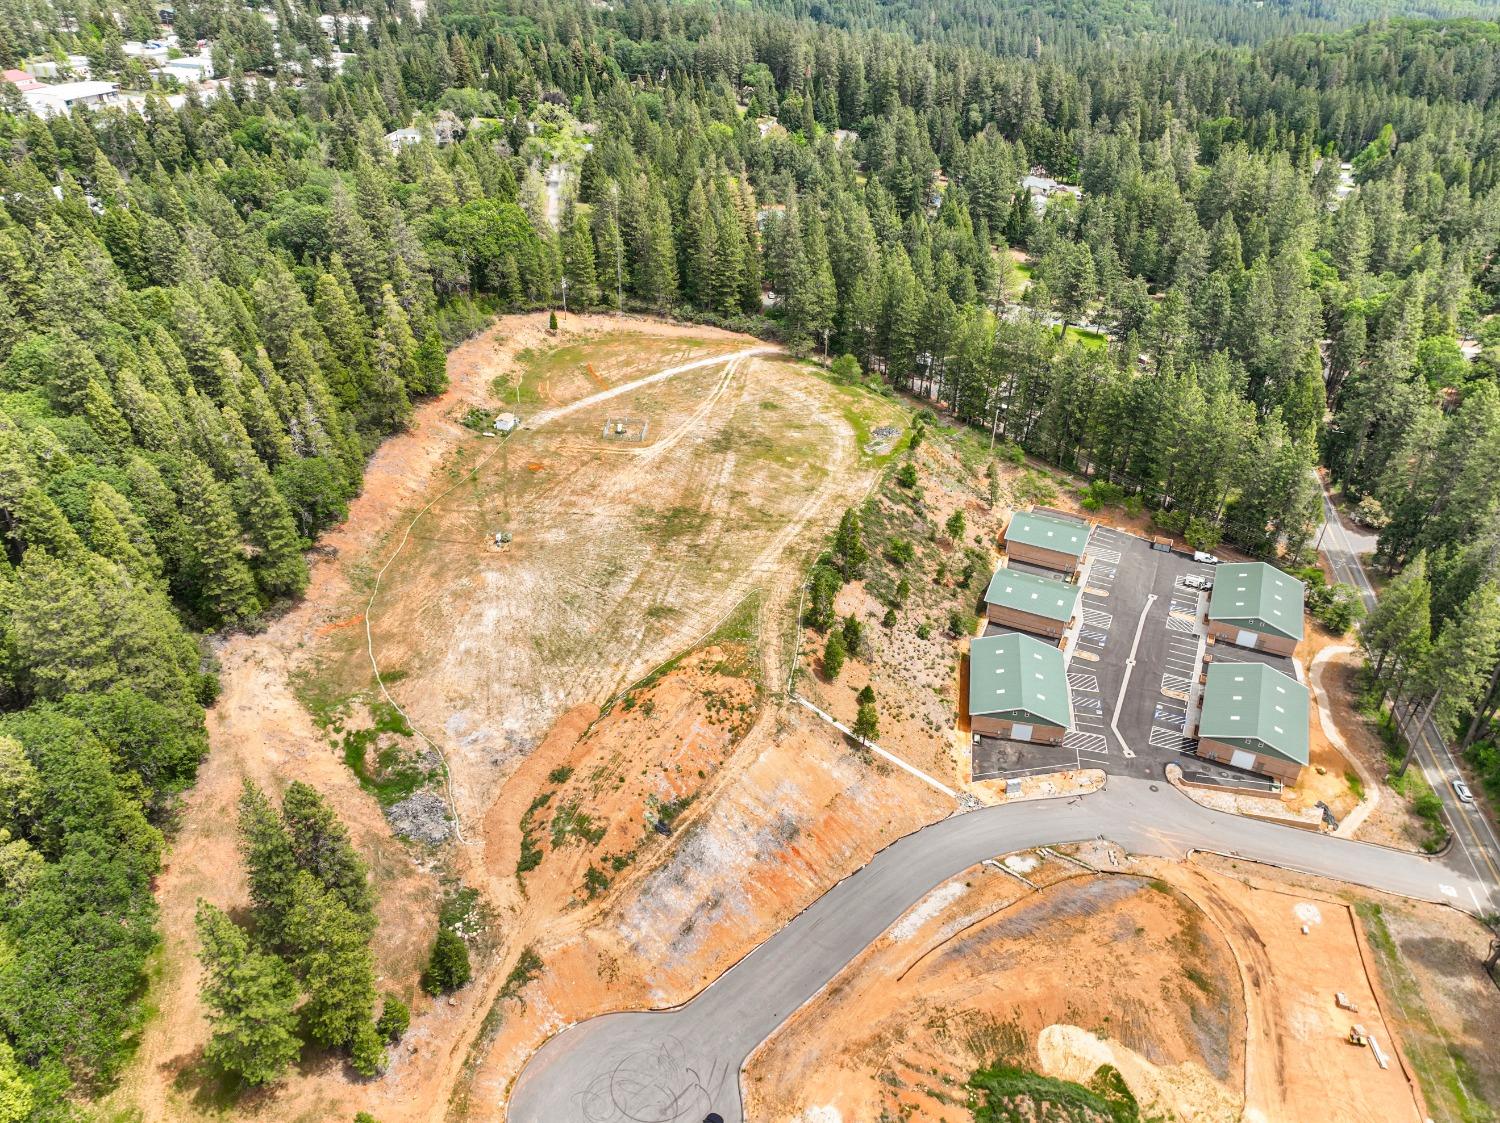 Photo of 12832 Greenhorn Rd in Grass Valley, CA